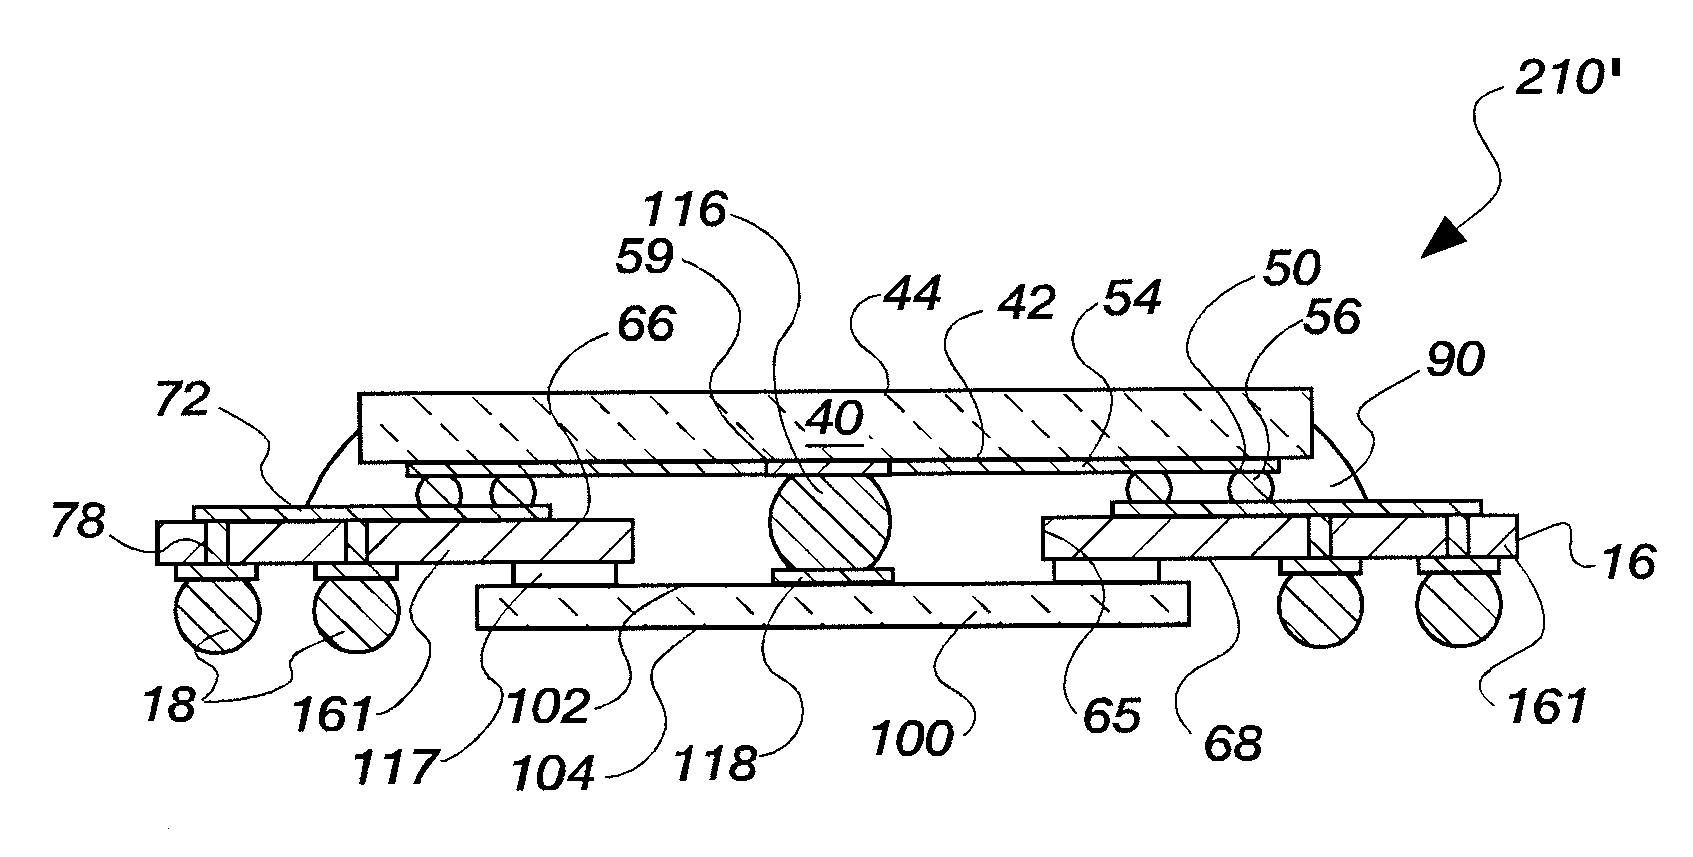 Semiconductor device assemblies and packages including multiple semiconductor device components